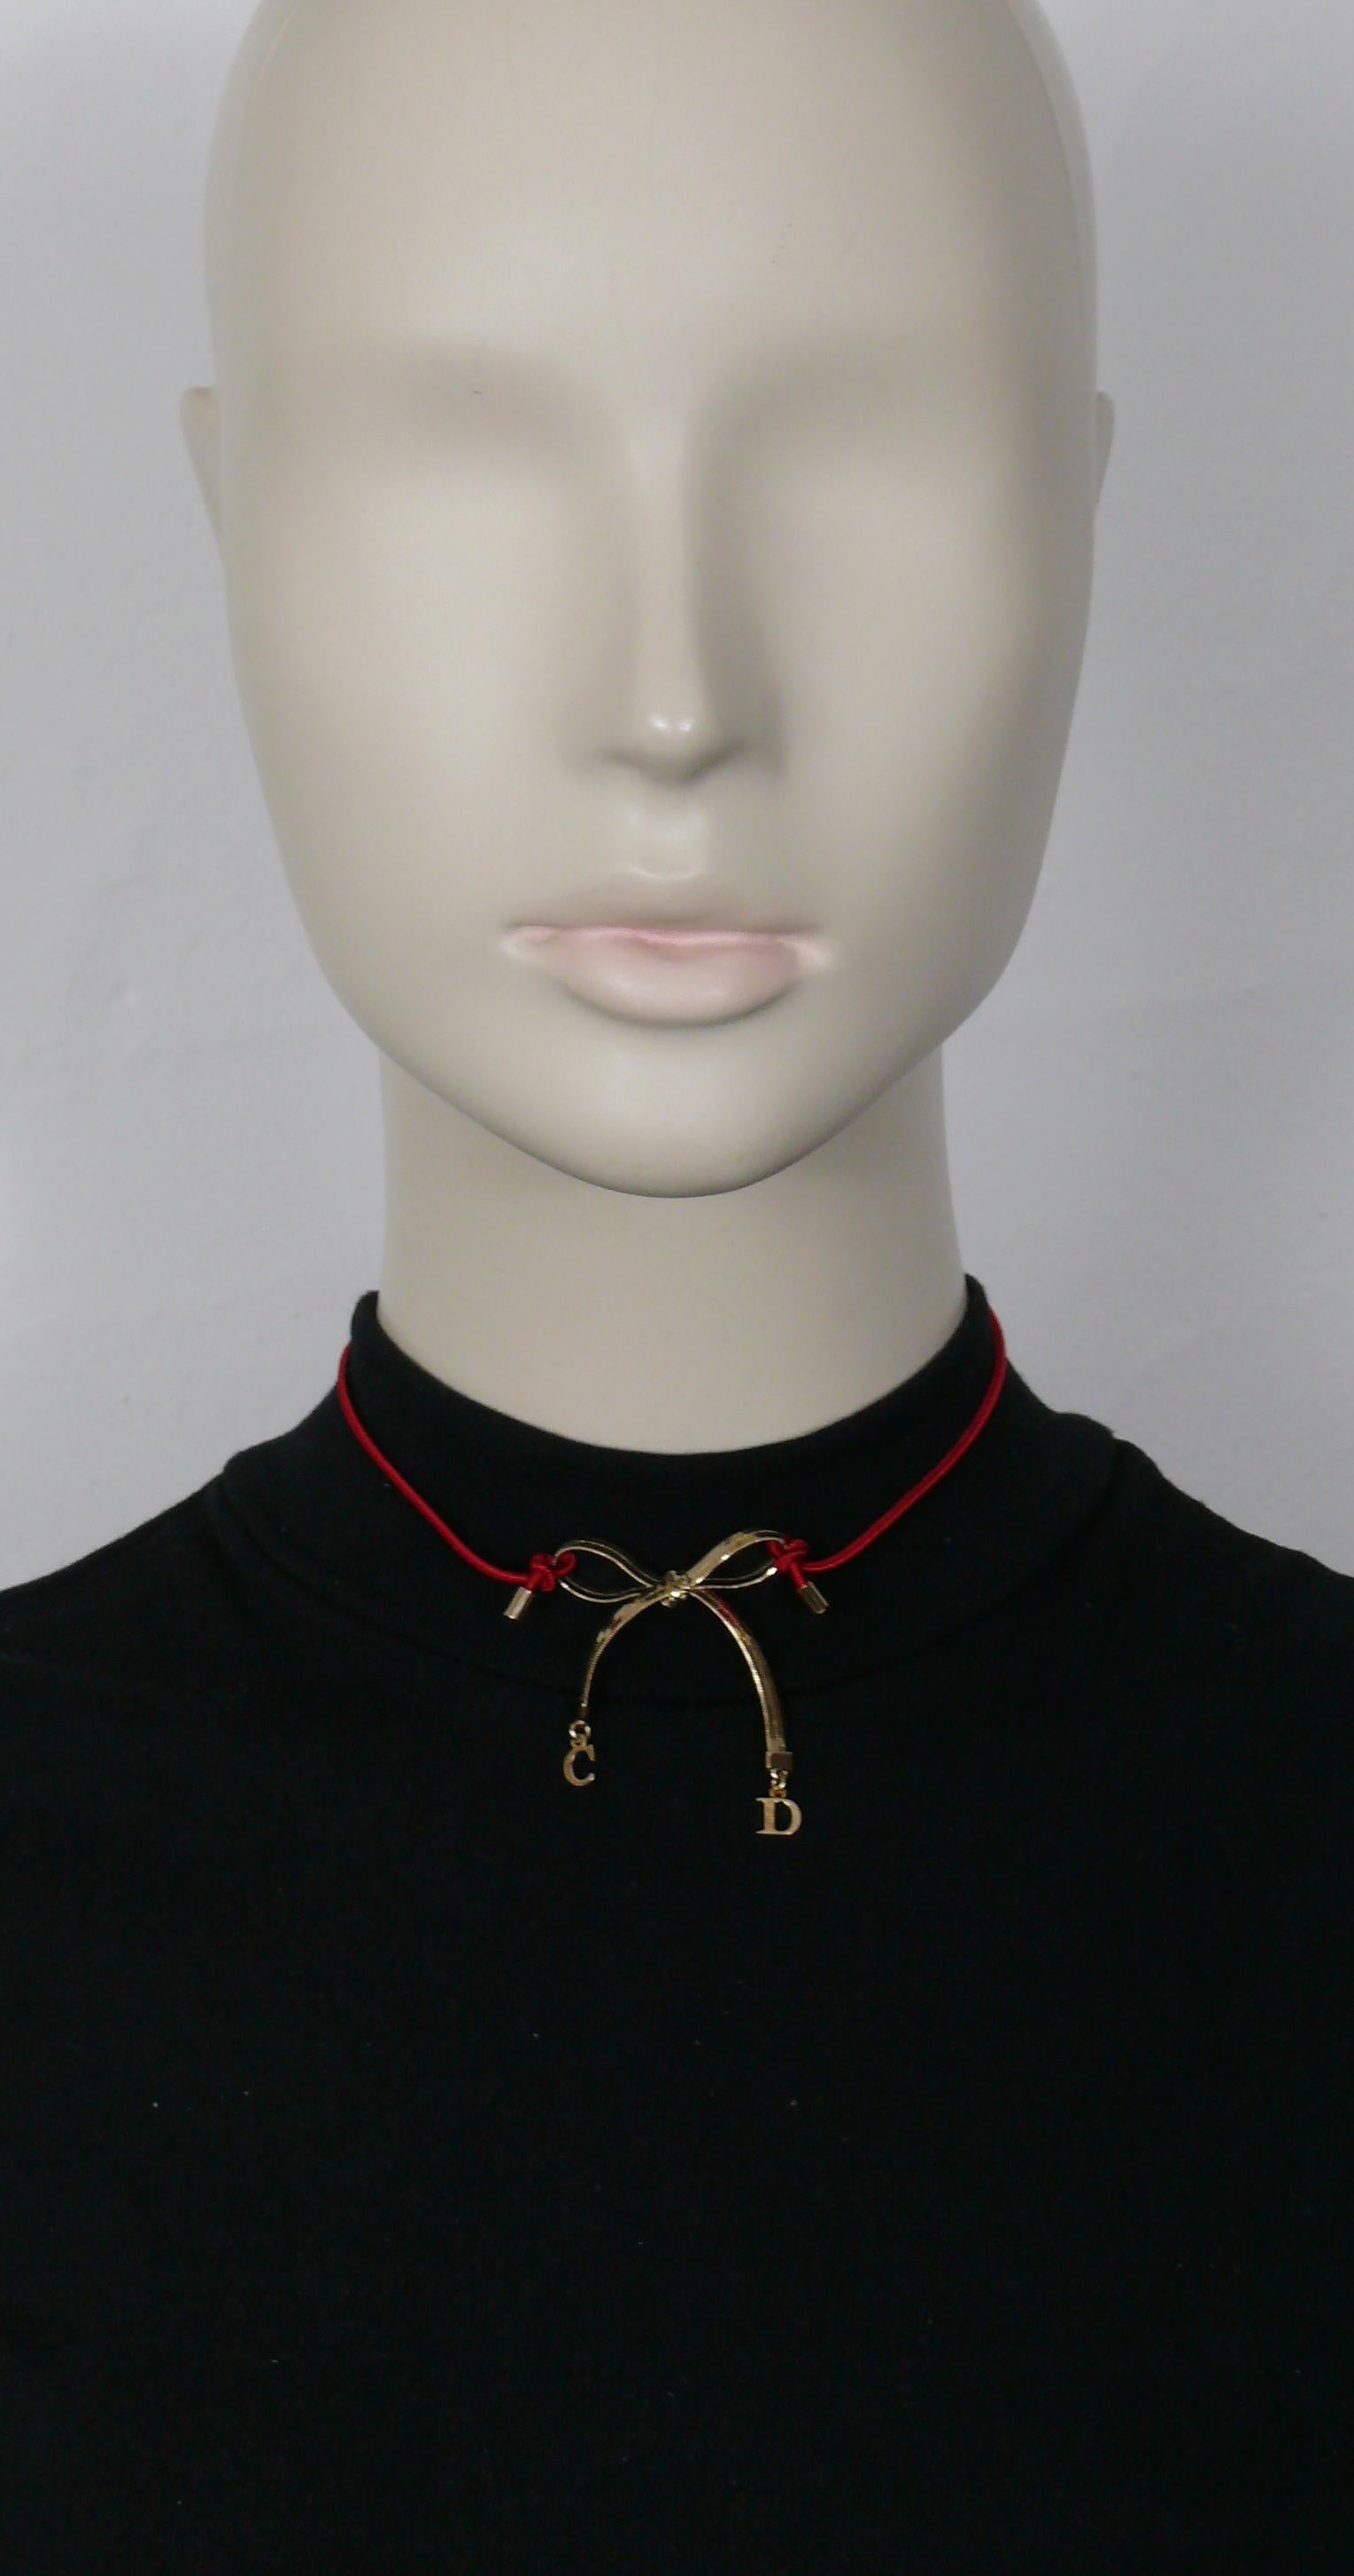 CHRISTIAN DIOR choker necklace featuring a gold tone bow and C D initial charms, red elasticated strap.

Lobster clasp closure.
Adjustable length.

Embossed DIOR.

Indicative measurements : adjustable length from approx. 33 cm (12.99 inches) to